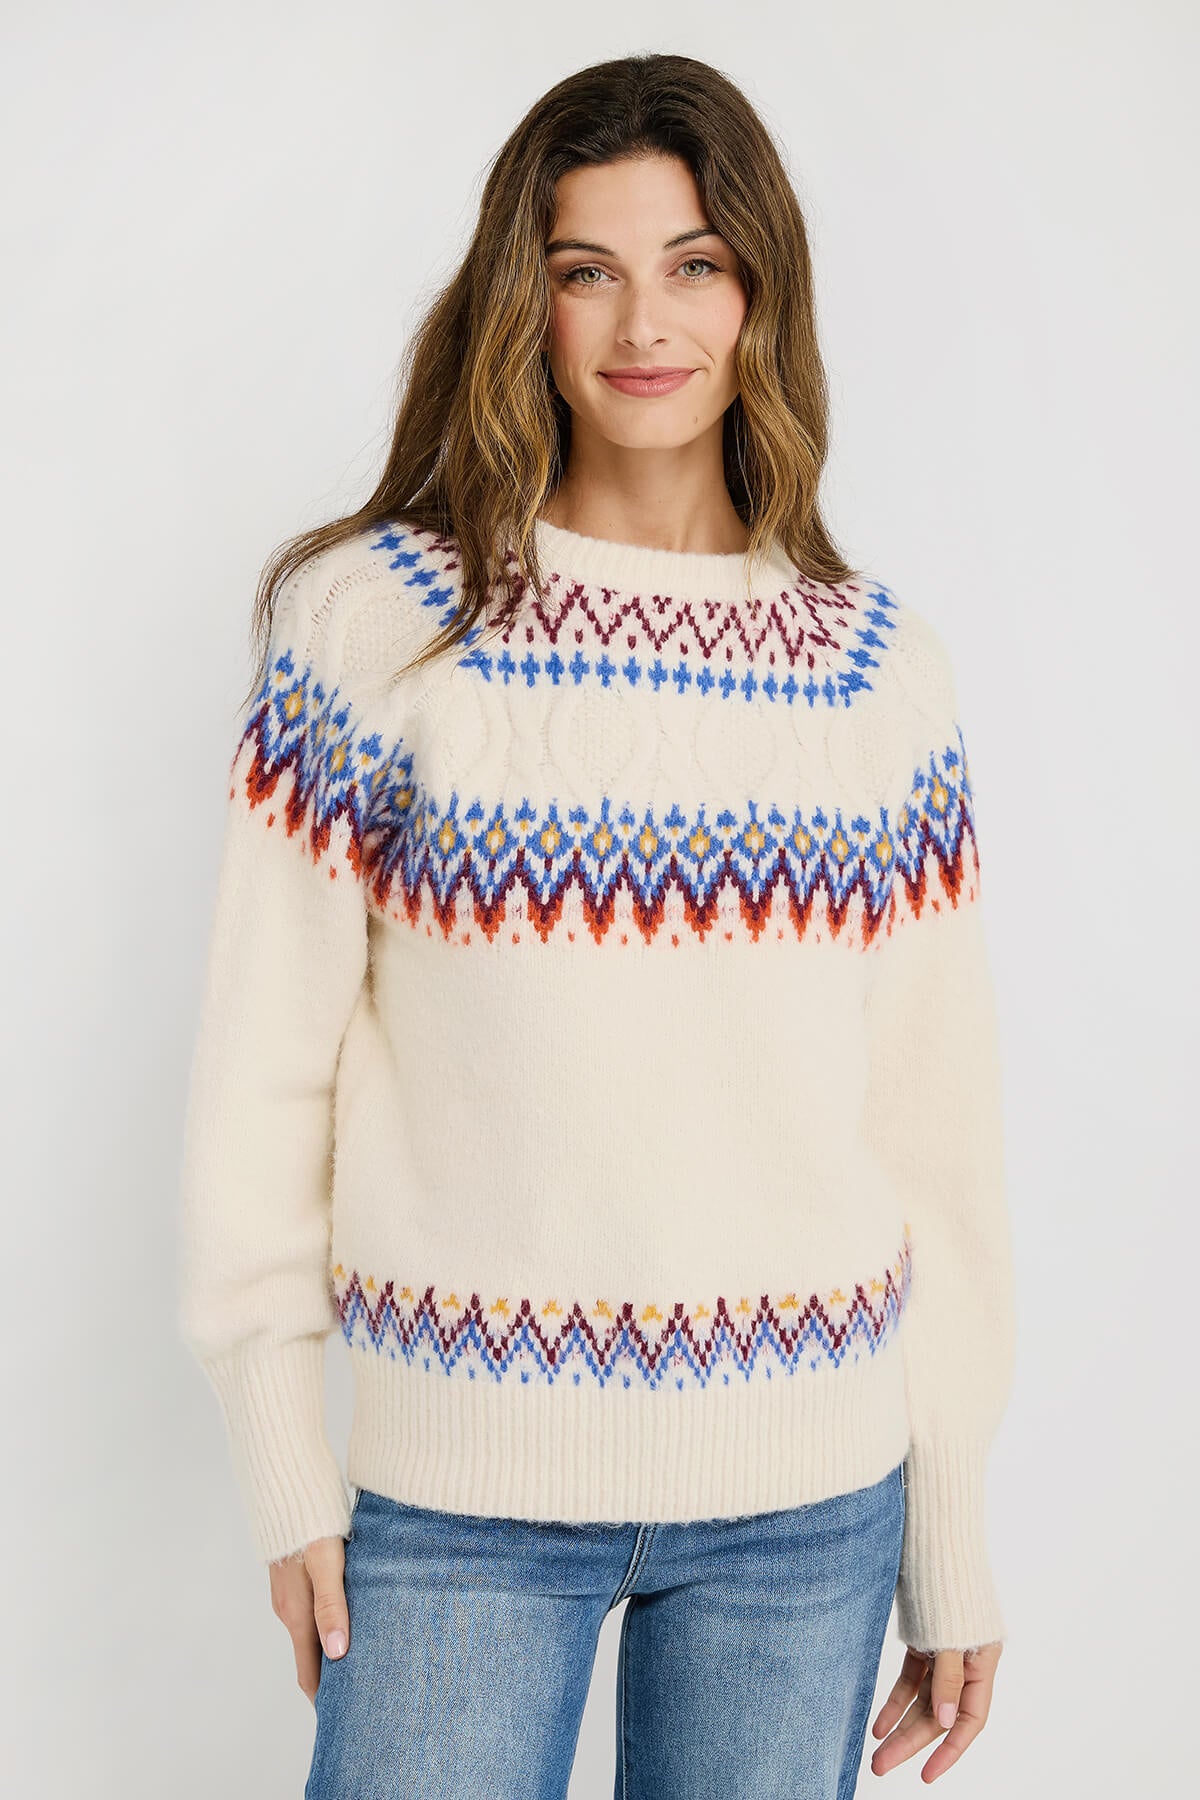 RD Style Melinda Fair Isle Sweater with Cabling and Balloon Sleeve